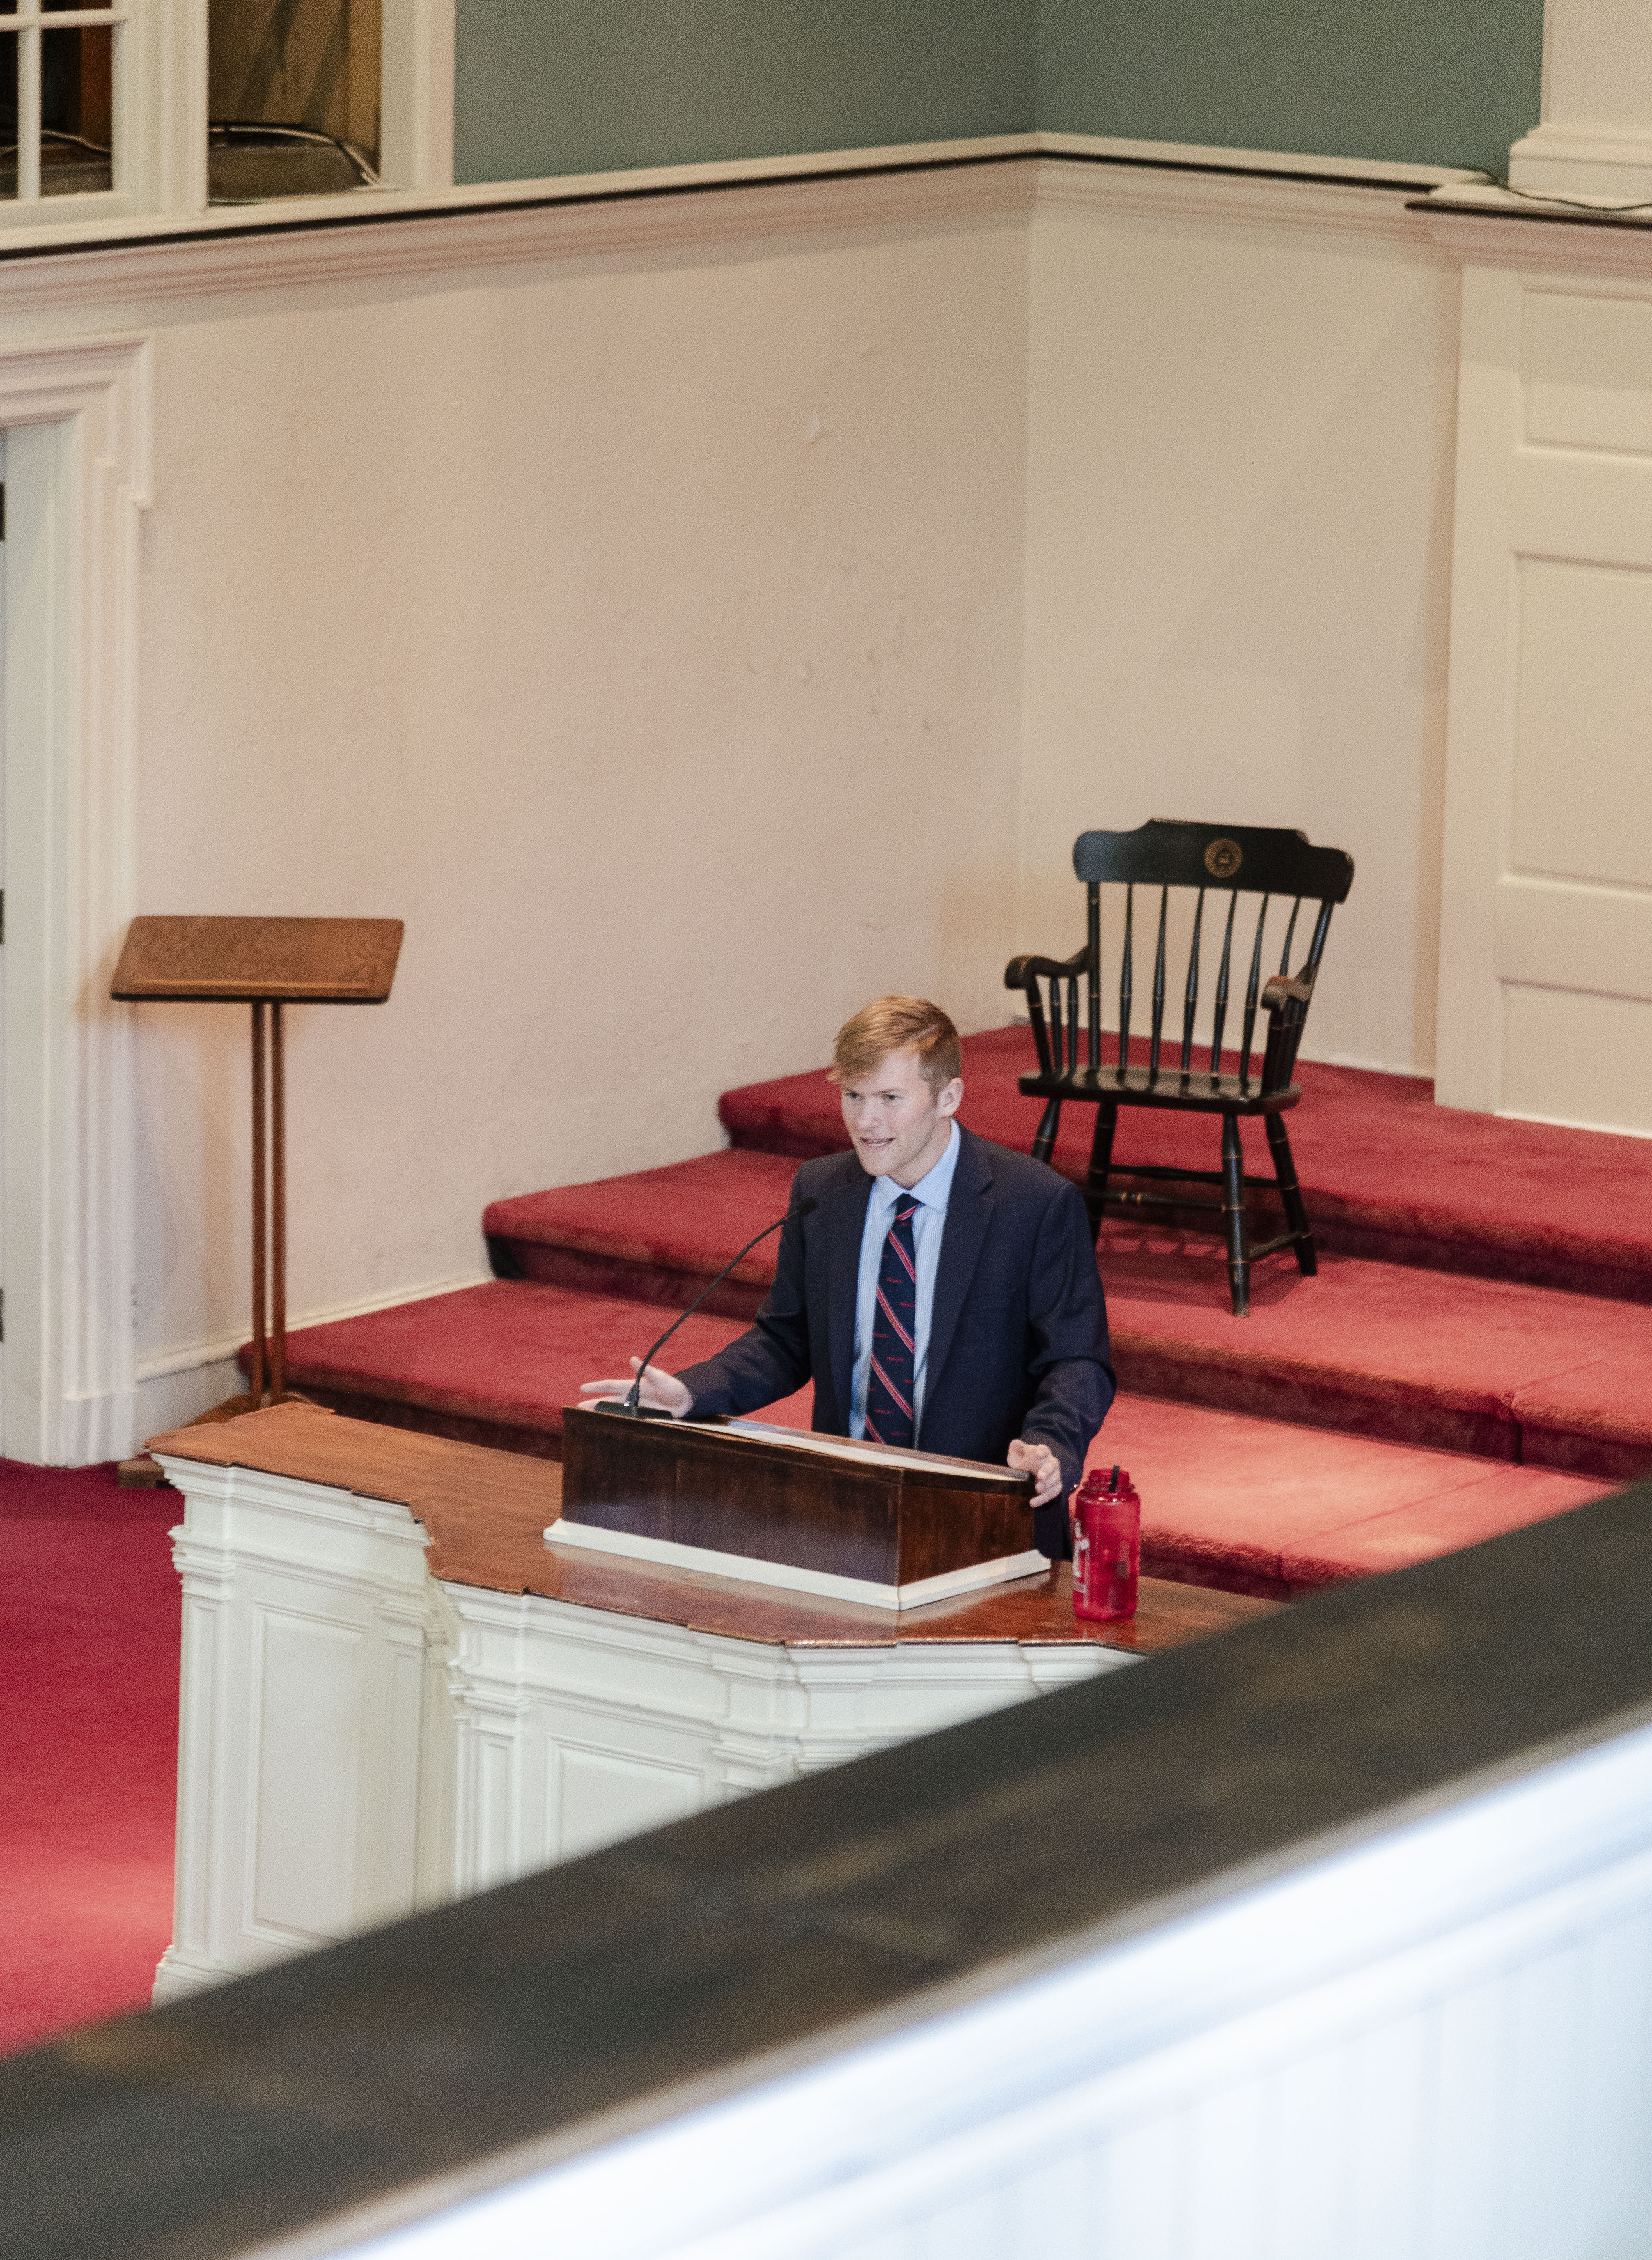  Grennon gave a Chapel Talk with ’shOUT earlier this semester in honor of LGBTQ+ History Month. 